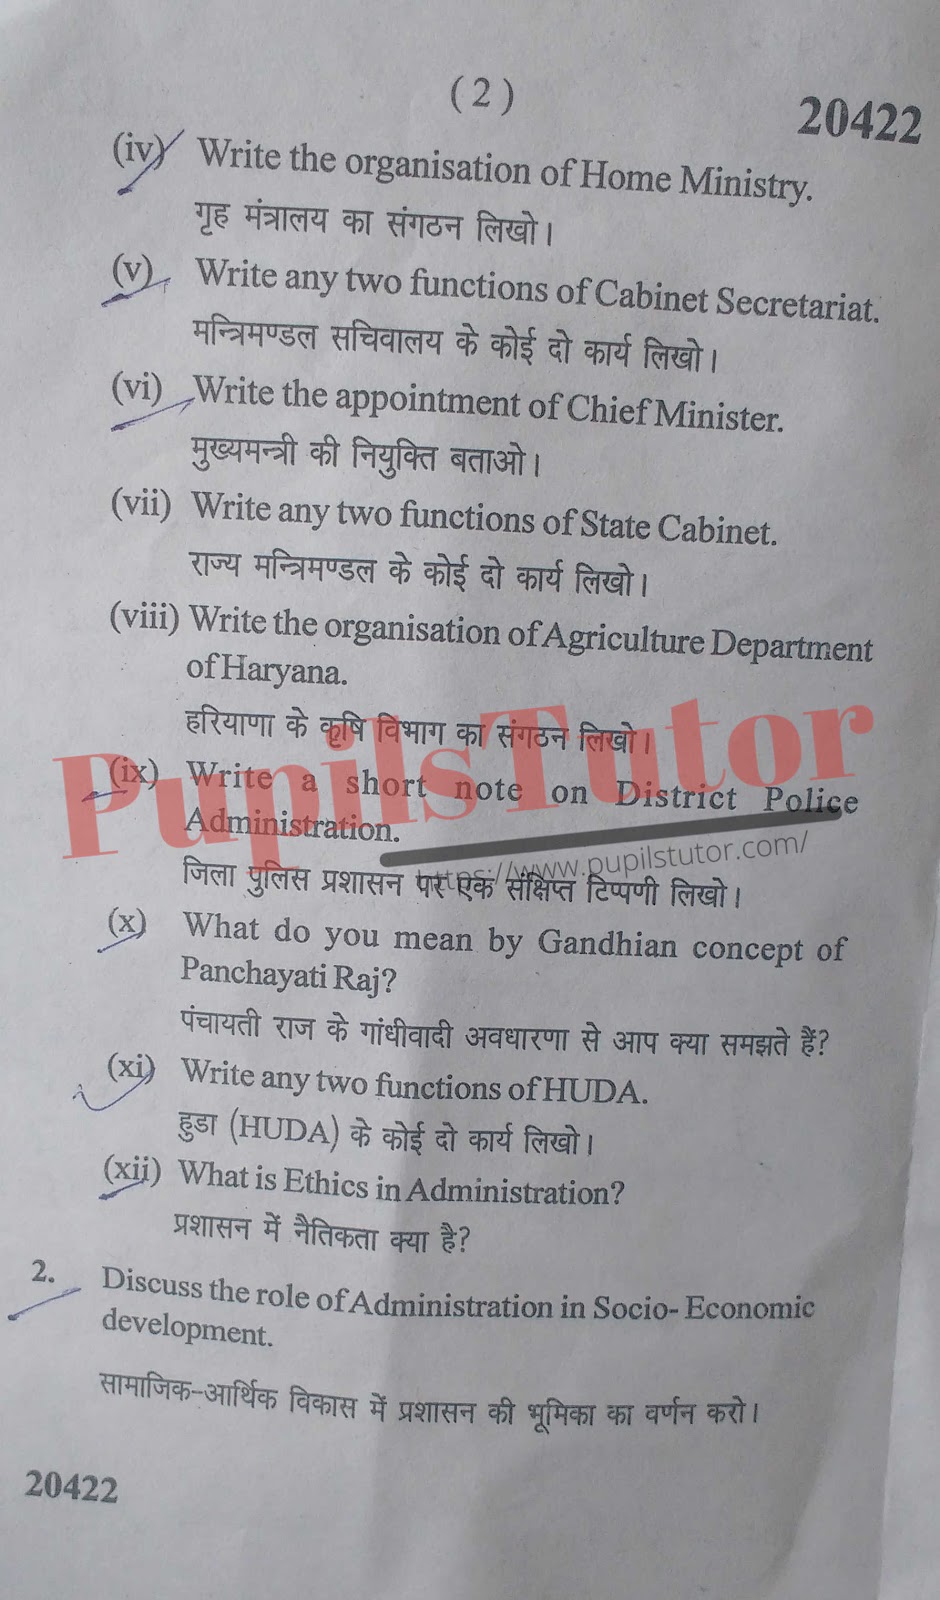 M.D. University M.A. [Public Administration] Indian Administration First Year Important Question Answer And Solution - www.pupilstutor.com (Paper Page Number 2)